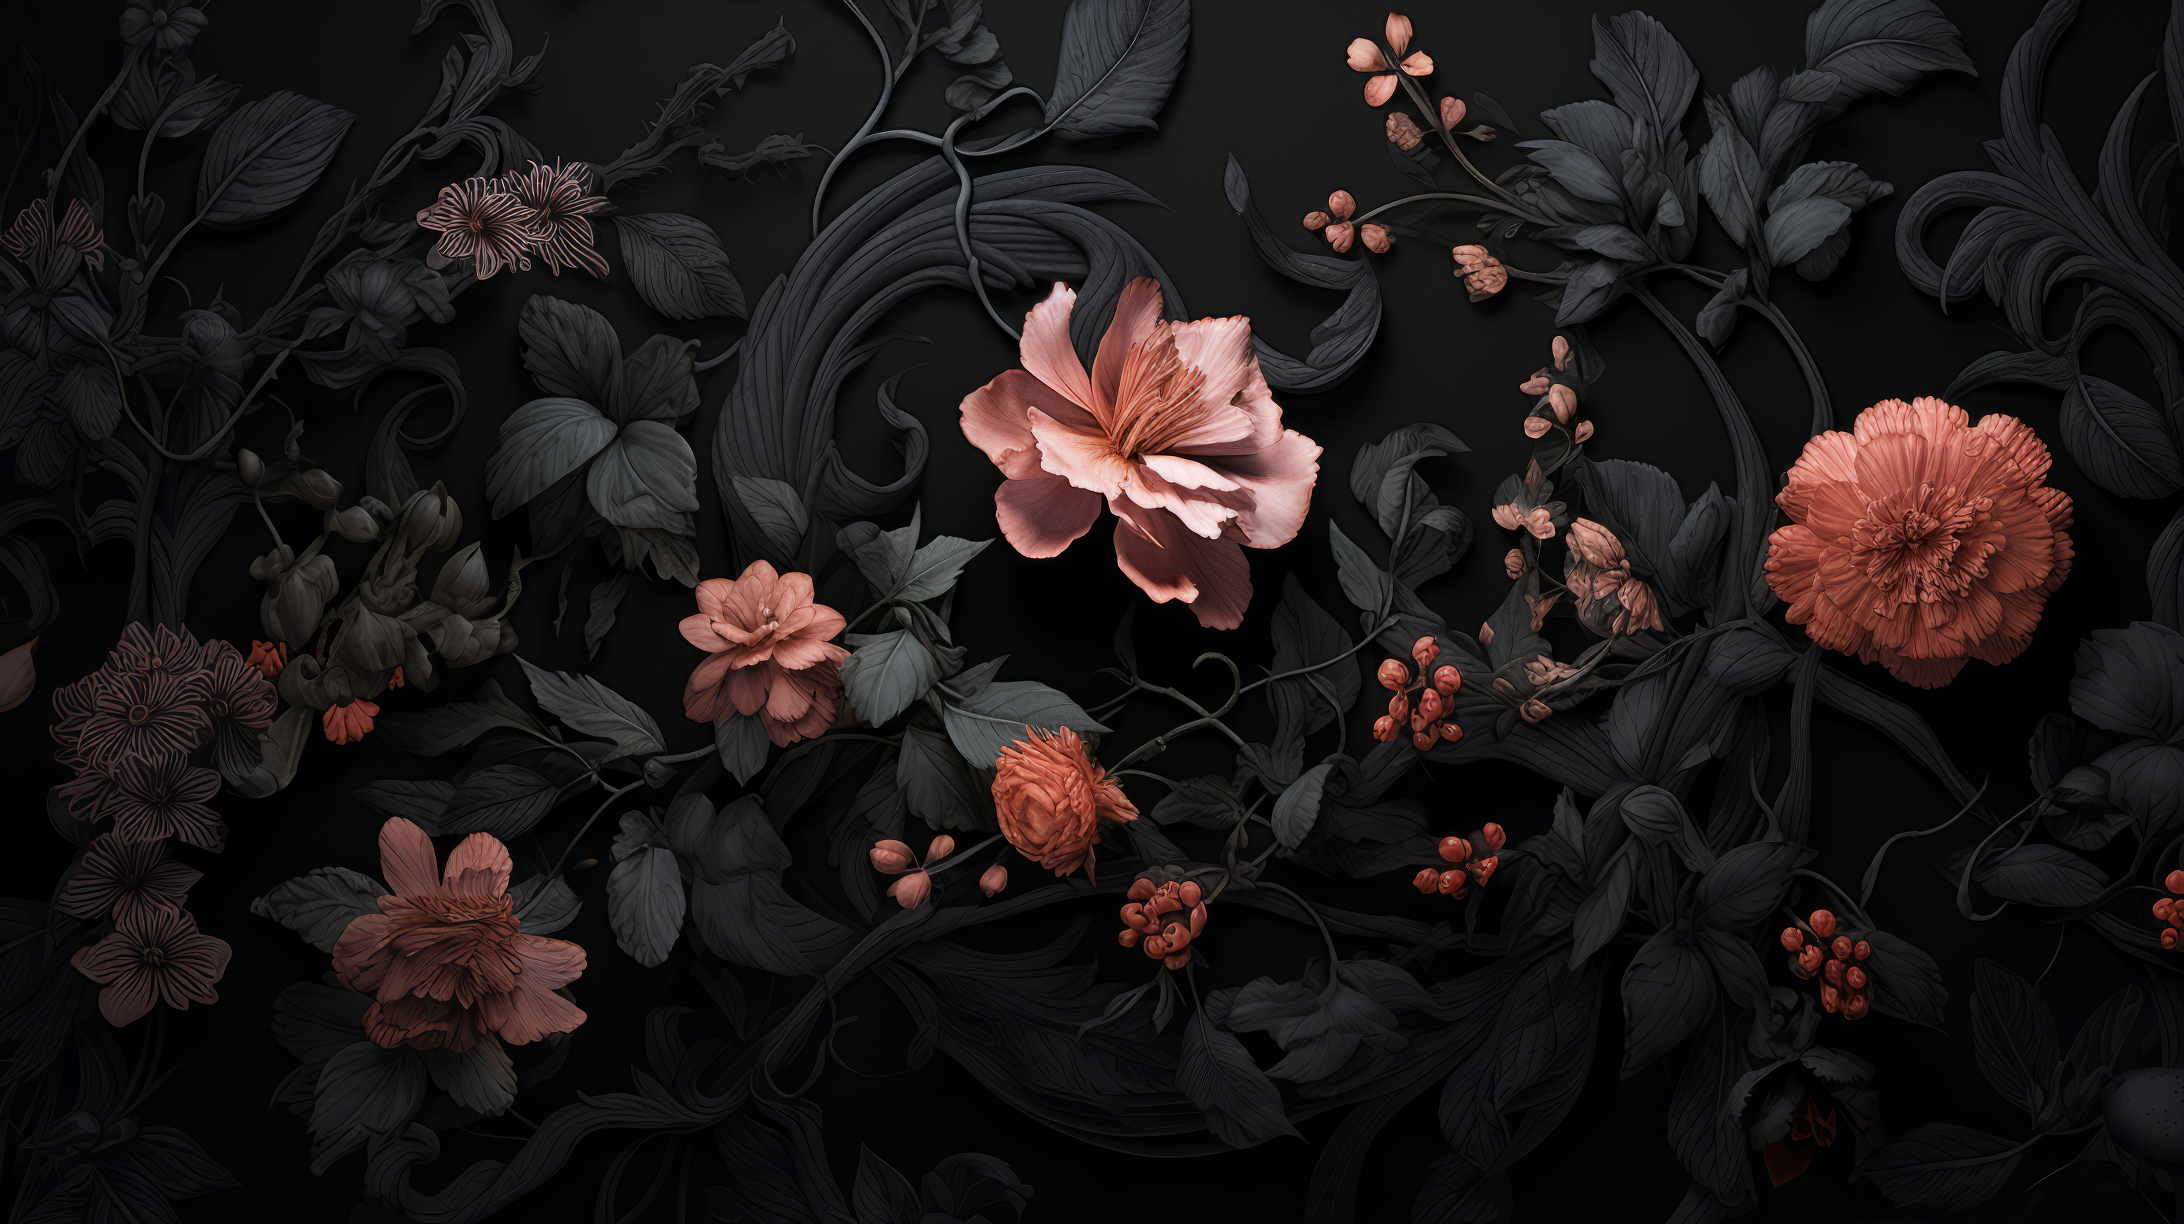 Elegant HD wallpaper featuring an assortment of flowers in a black aesthetic design, ideal for a sophisticated desktop background.